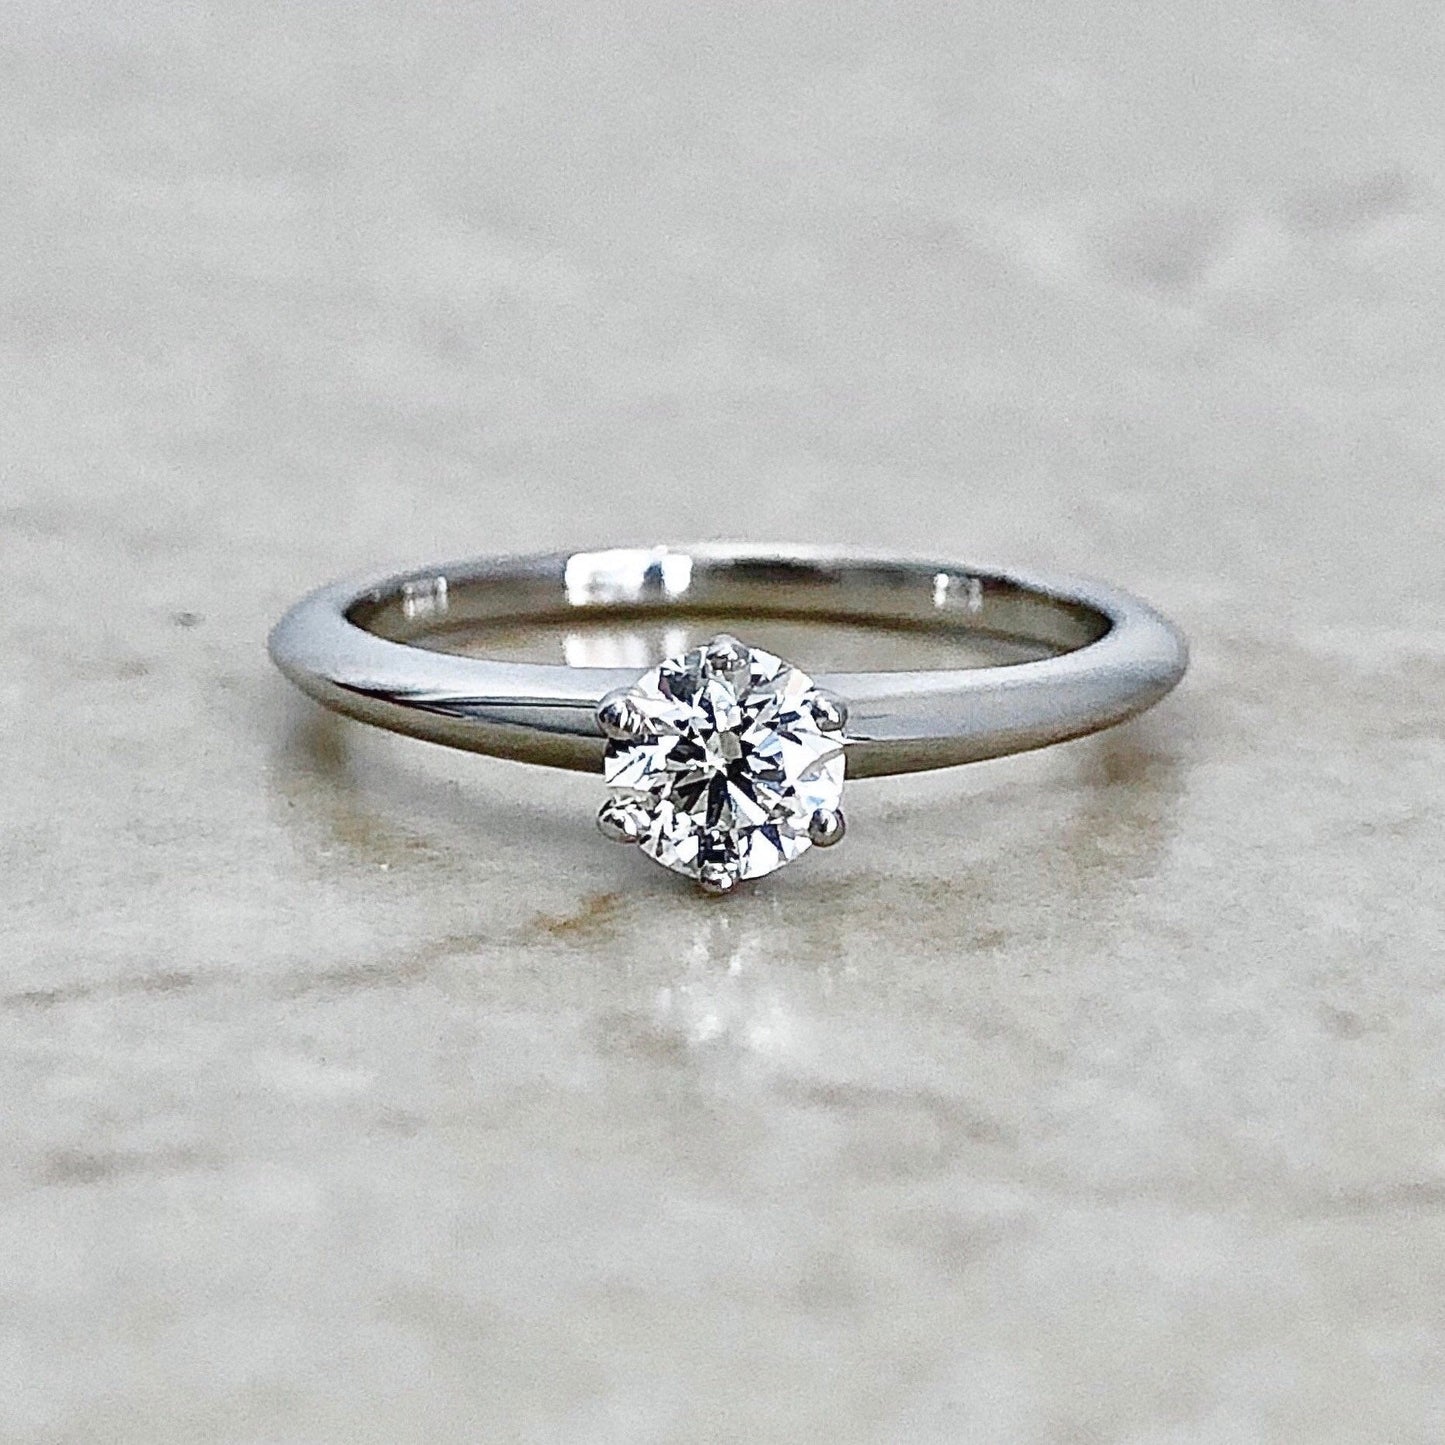 Tiffany & Co. Platinum Diamond Engagement Ring - Diamond Solitaire Ring - Promise Ring - Anniversary Ring - Best Gift For Her